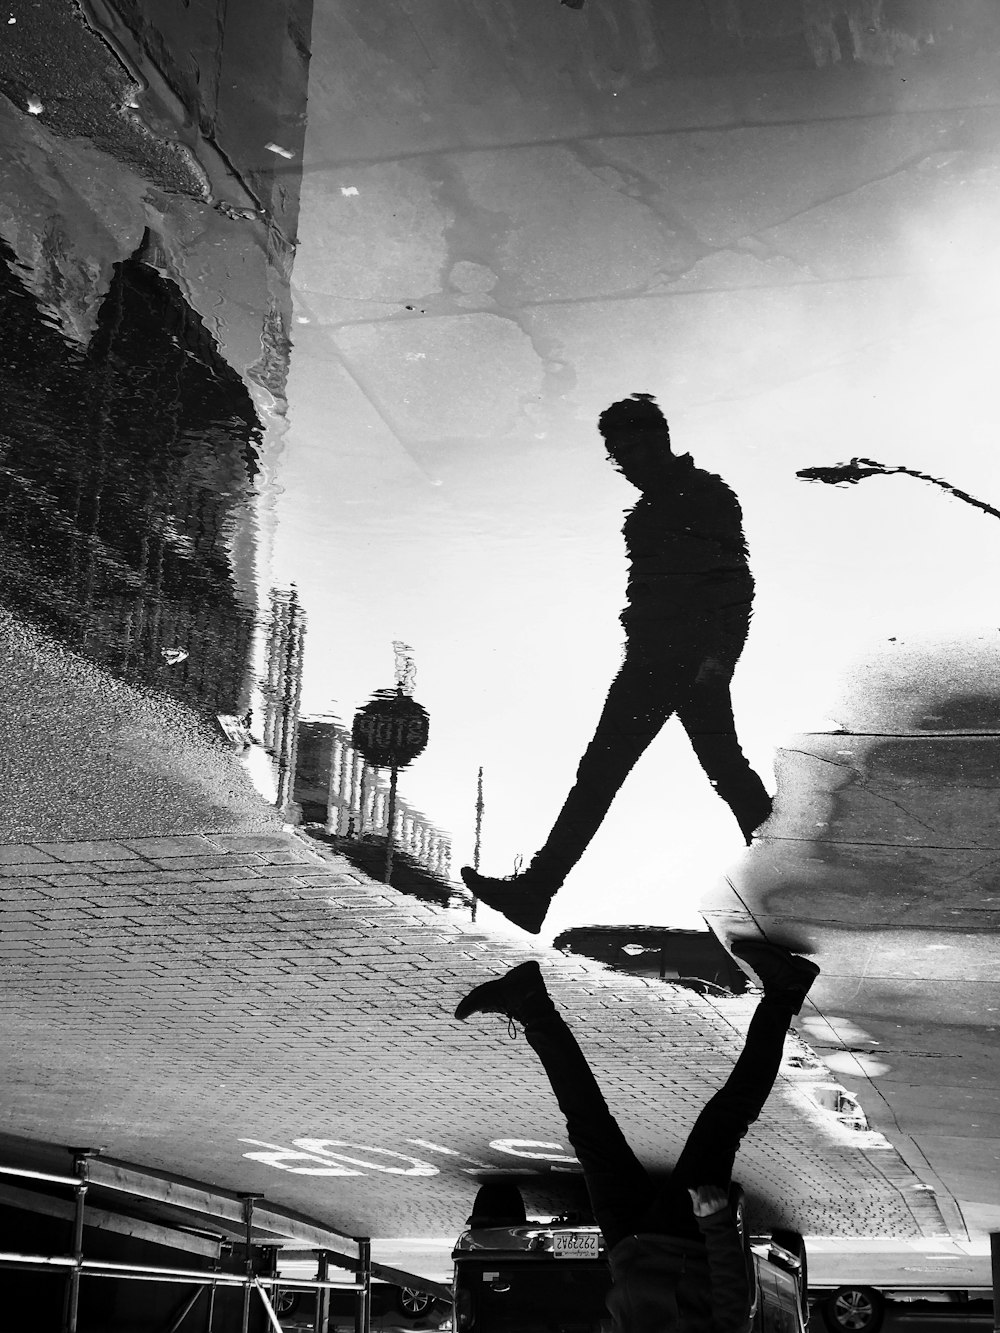 water reflection shadow of man walking on street in grayscale photography